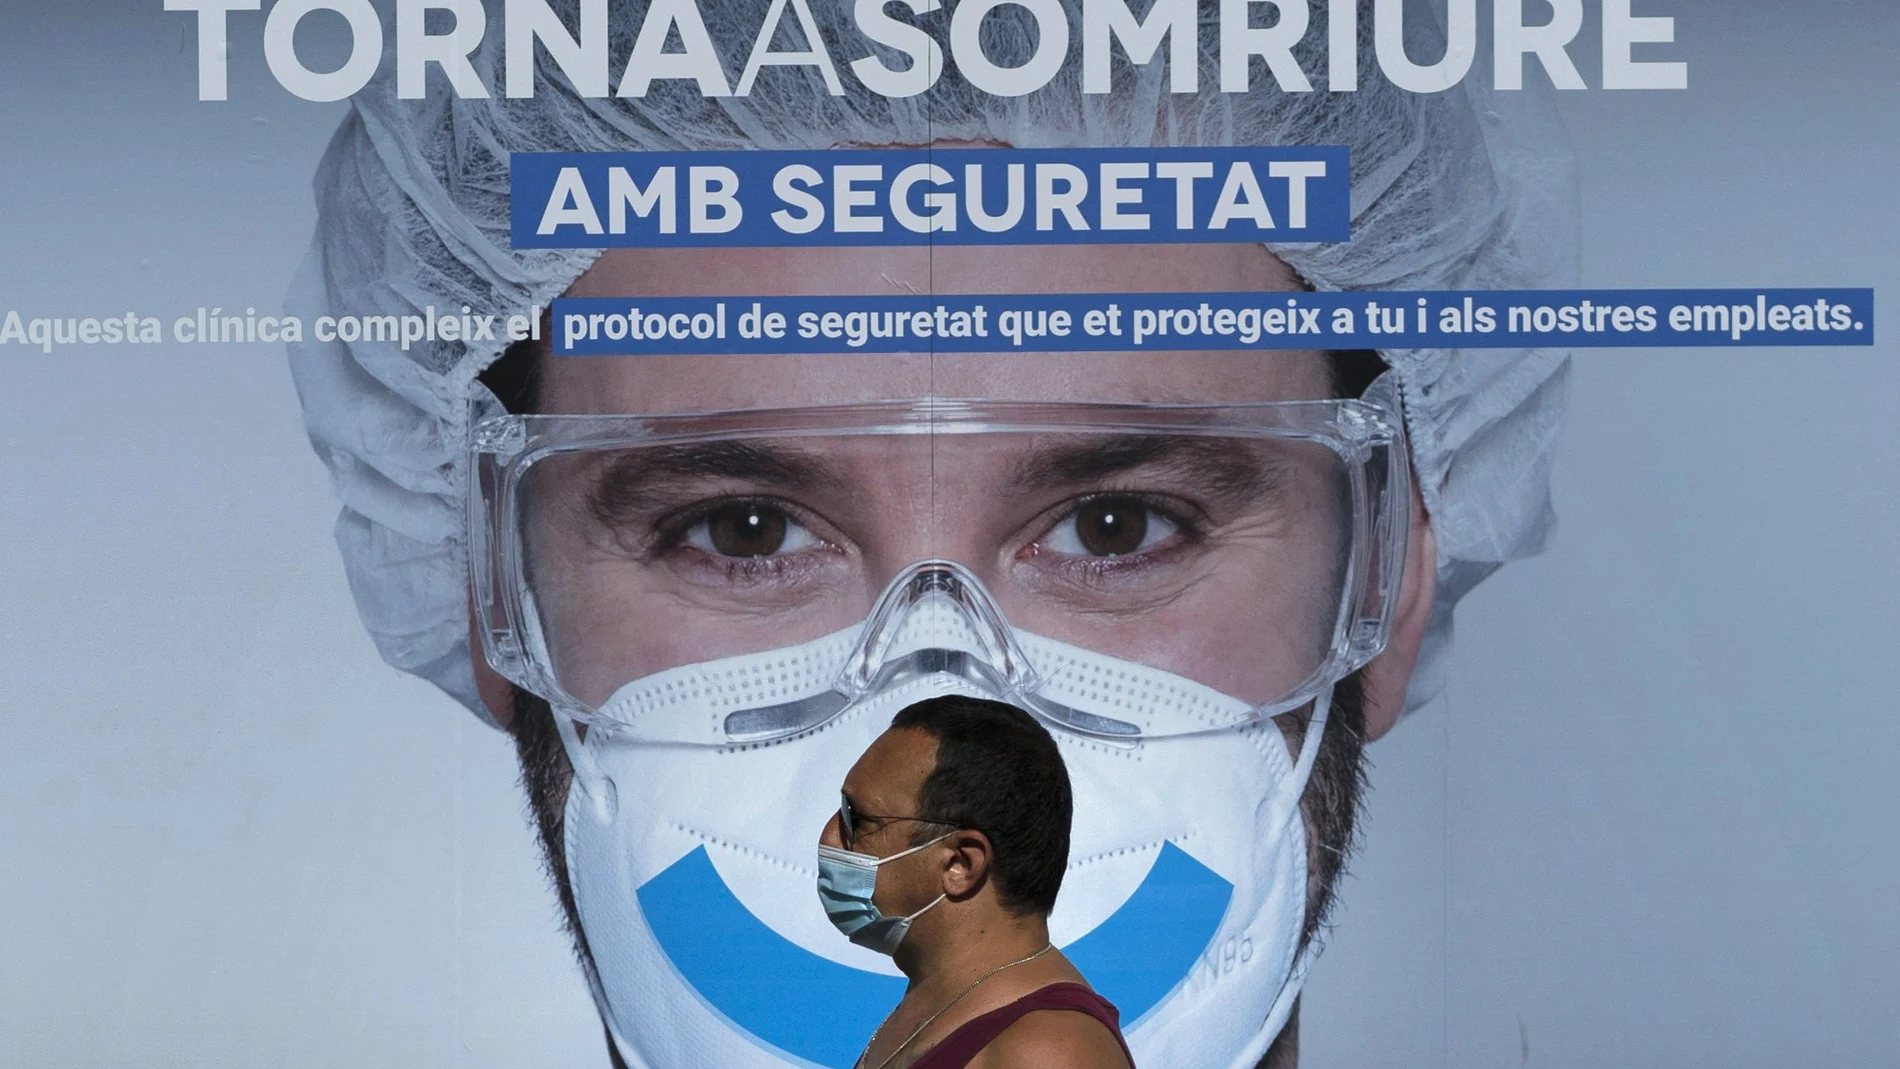 A man wearing face mask walks past an advertising of a private clinic in Barcelona, Spain on Monday Aug. 31, 2020. Spain, with nearly 440,000 infections of the new virus since February, has become western Europe's hardest hit country by a new surging wave of fresh outbreaks. (AP Photo/Emilio Morenatti)